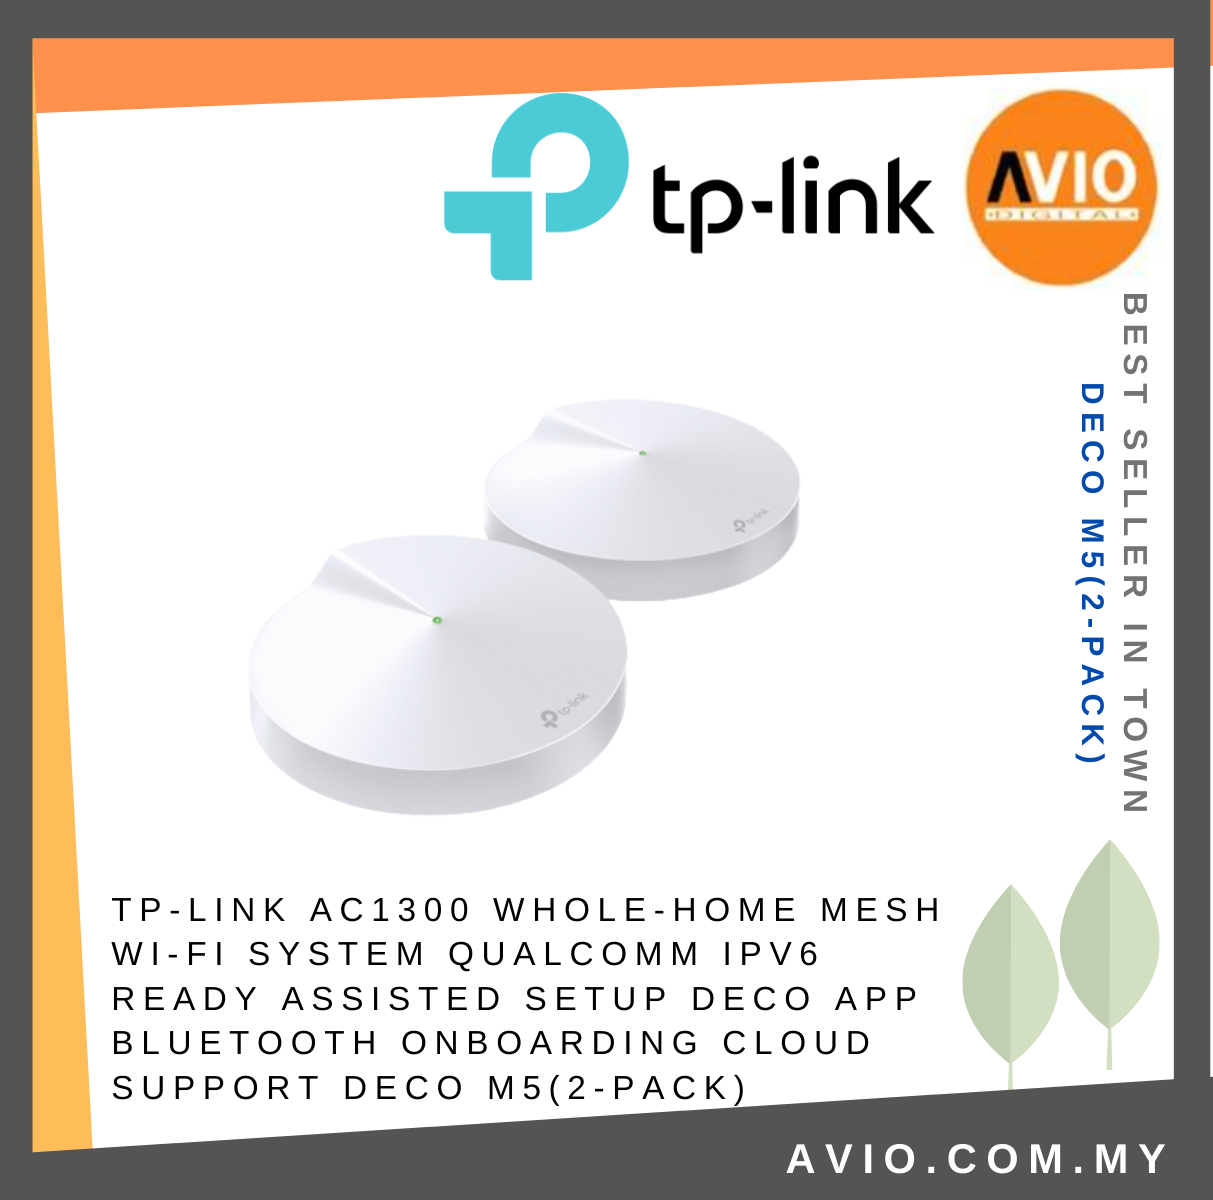 TP-LINK Tplink AC1300 Whole Home Mesh Wifi Wi-Fi System Dual Band